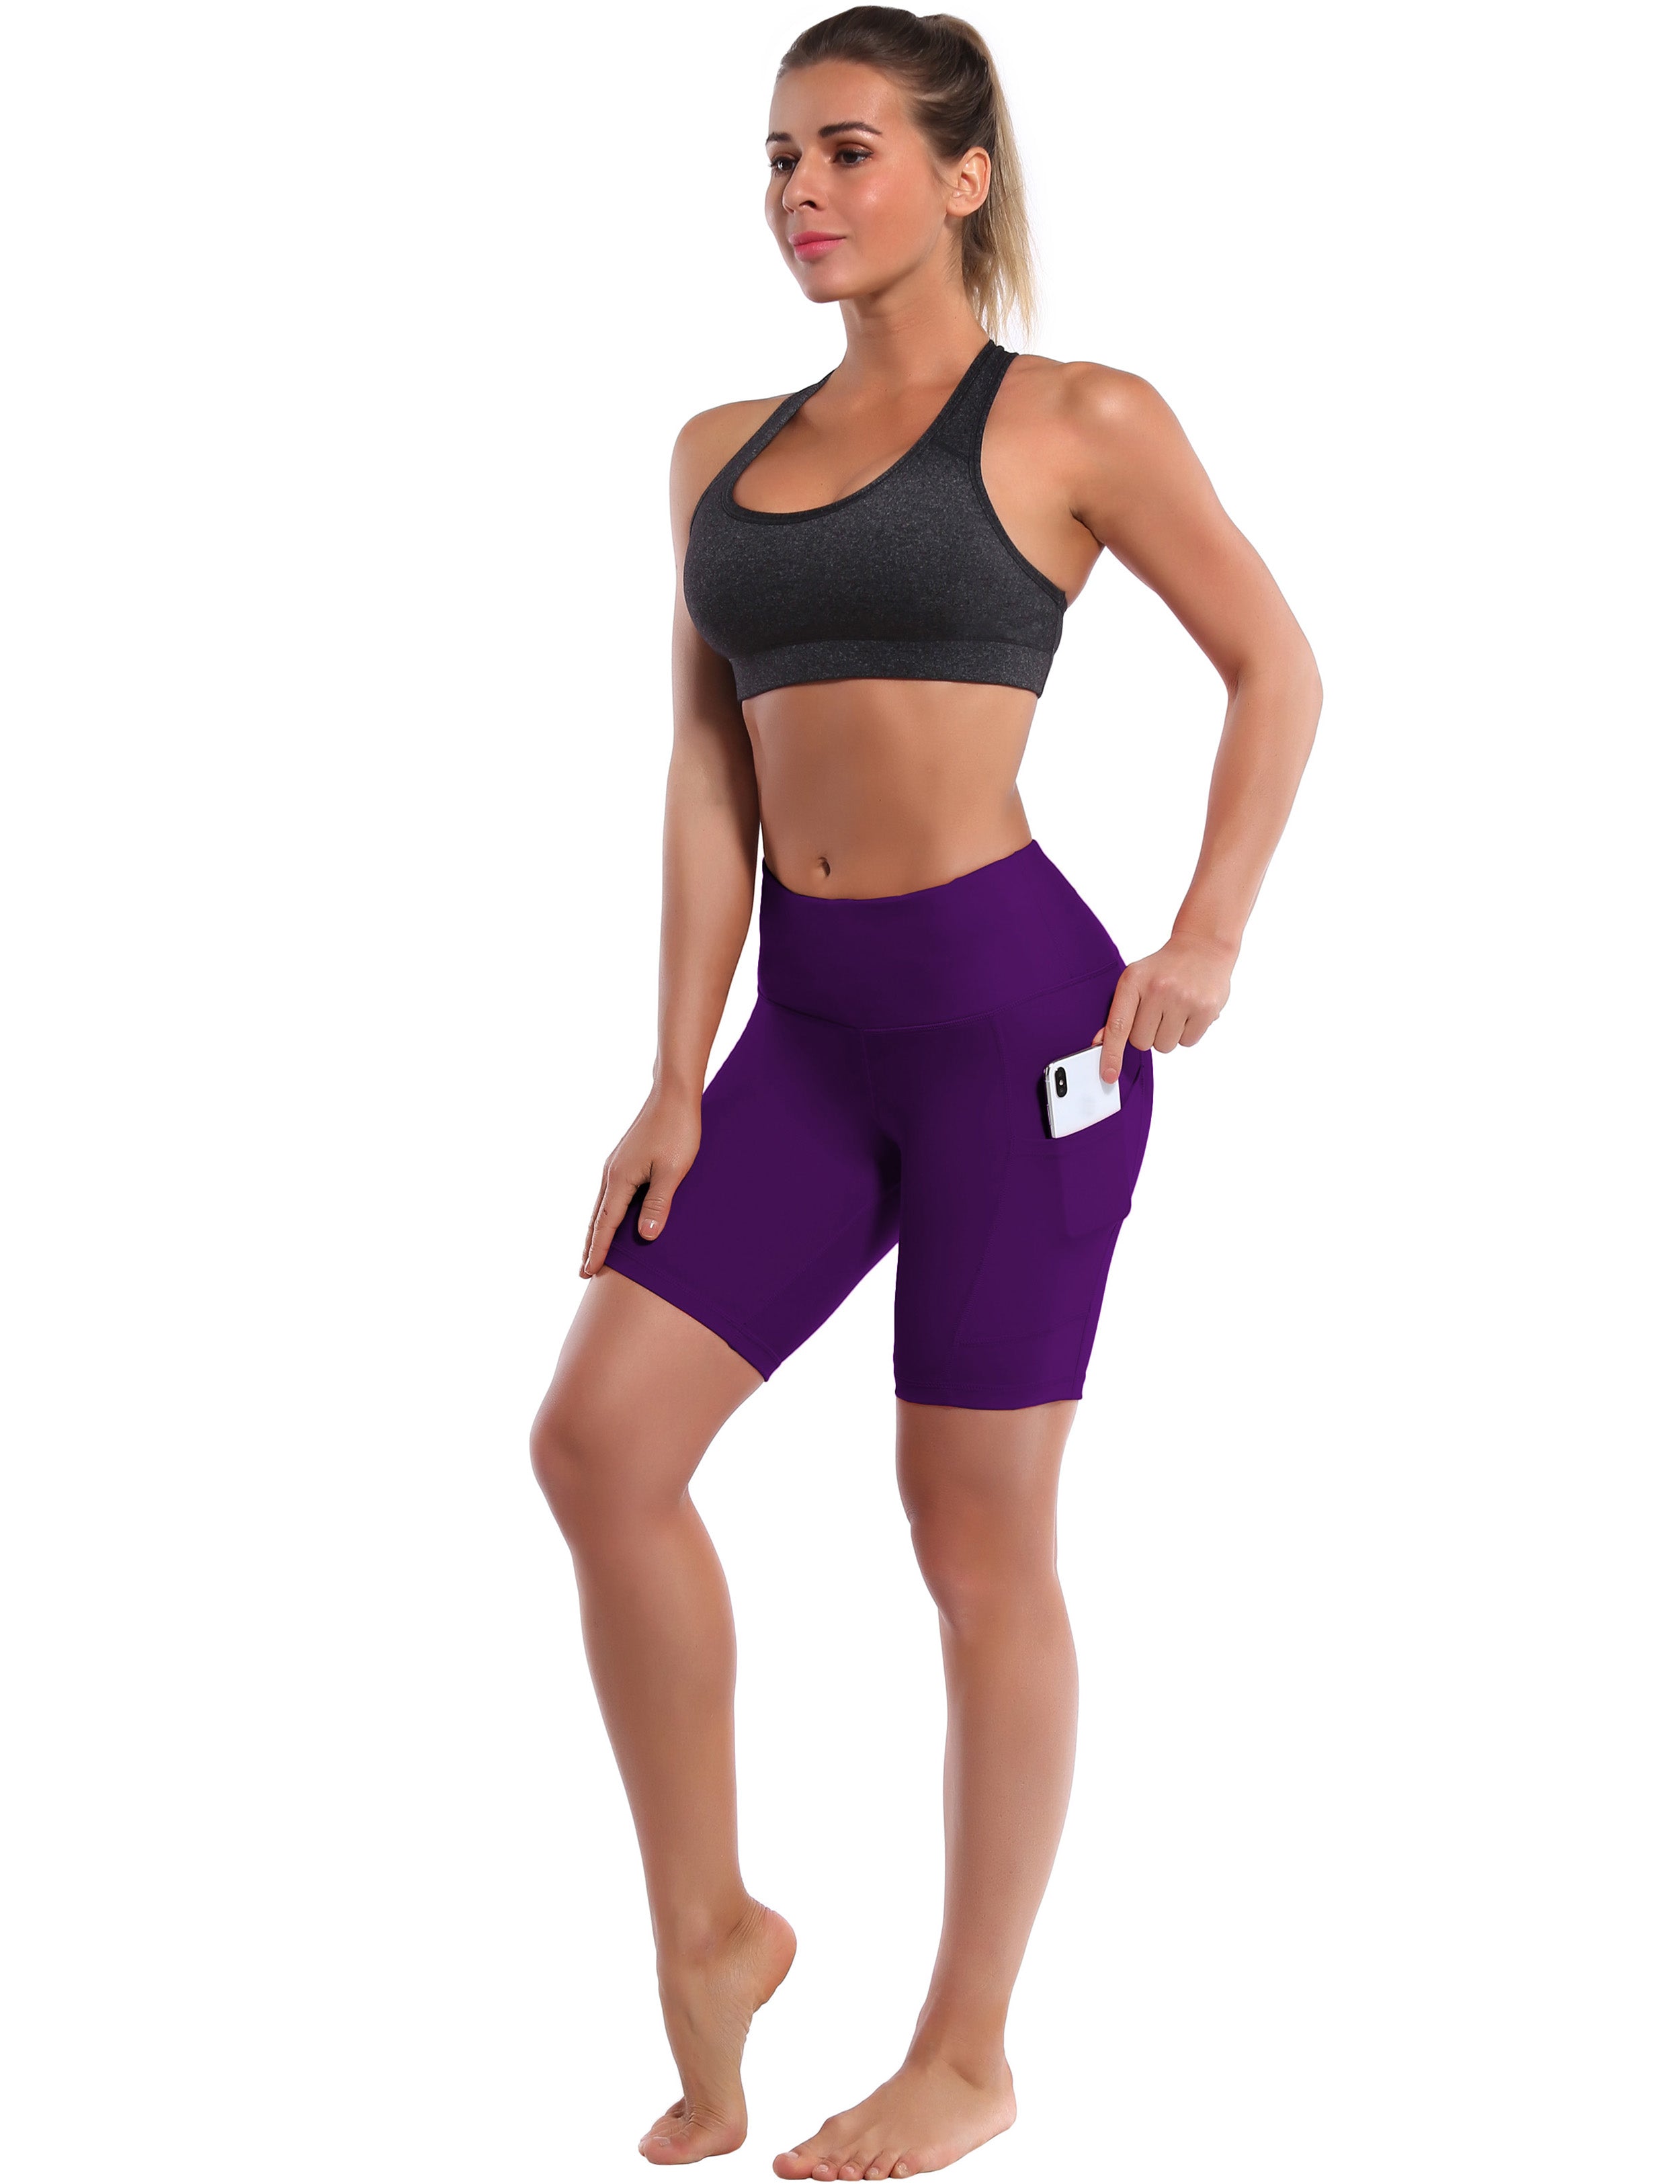 8" Side Pockets Biking Shorts eggplantpurple Sleek, soft, smooth and totally comfortable: our newest style is here. Softest-ever fabric High elasticity High density 4-way stretch Fabric doesn't attract lint easily No see-through Moisture-wicking Machine wash 75% Nylon, 25% Spandex